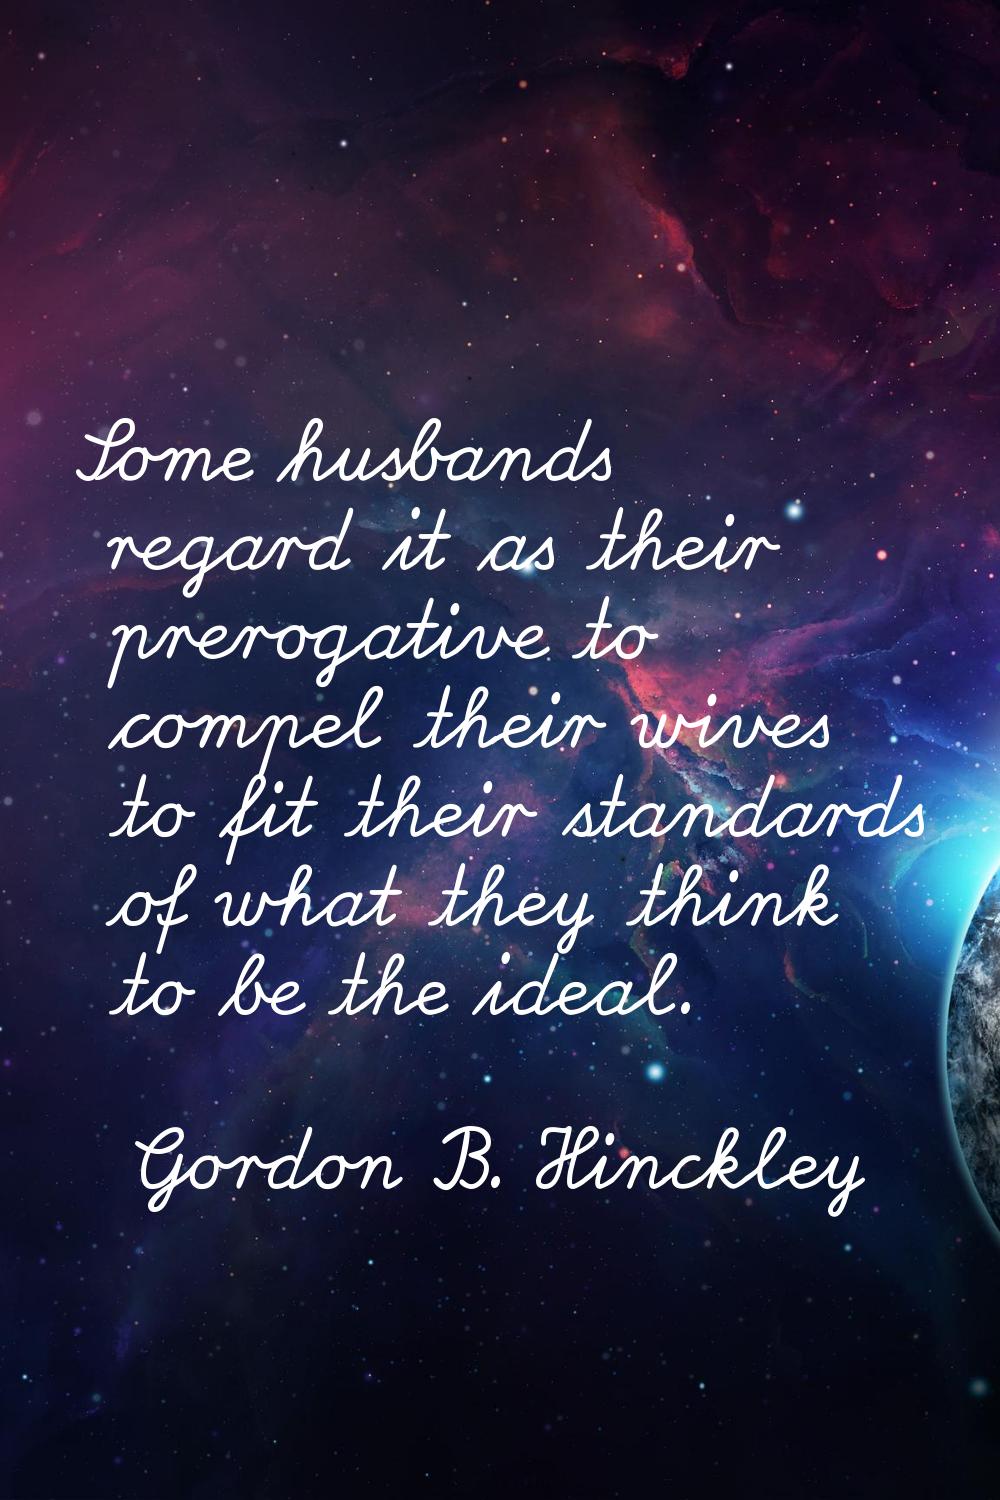 Some husbands regard it as their prerogative to compel their wives to fit their standards of what t